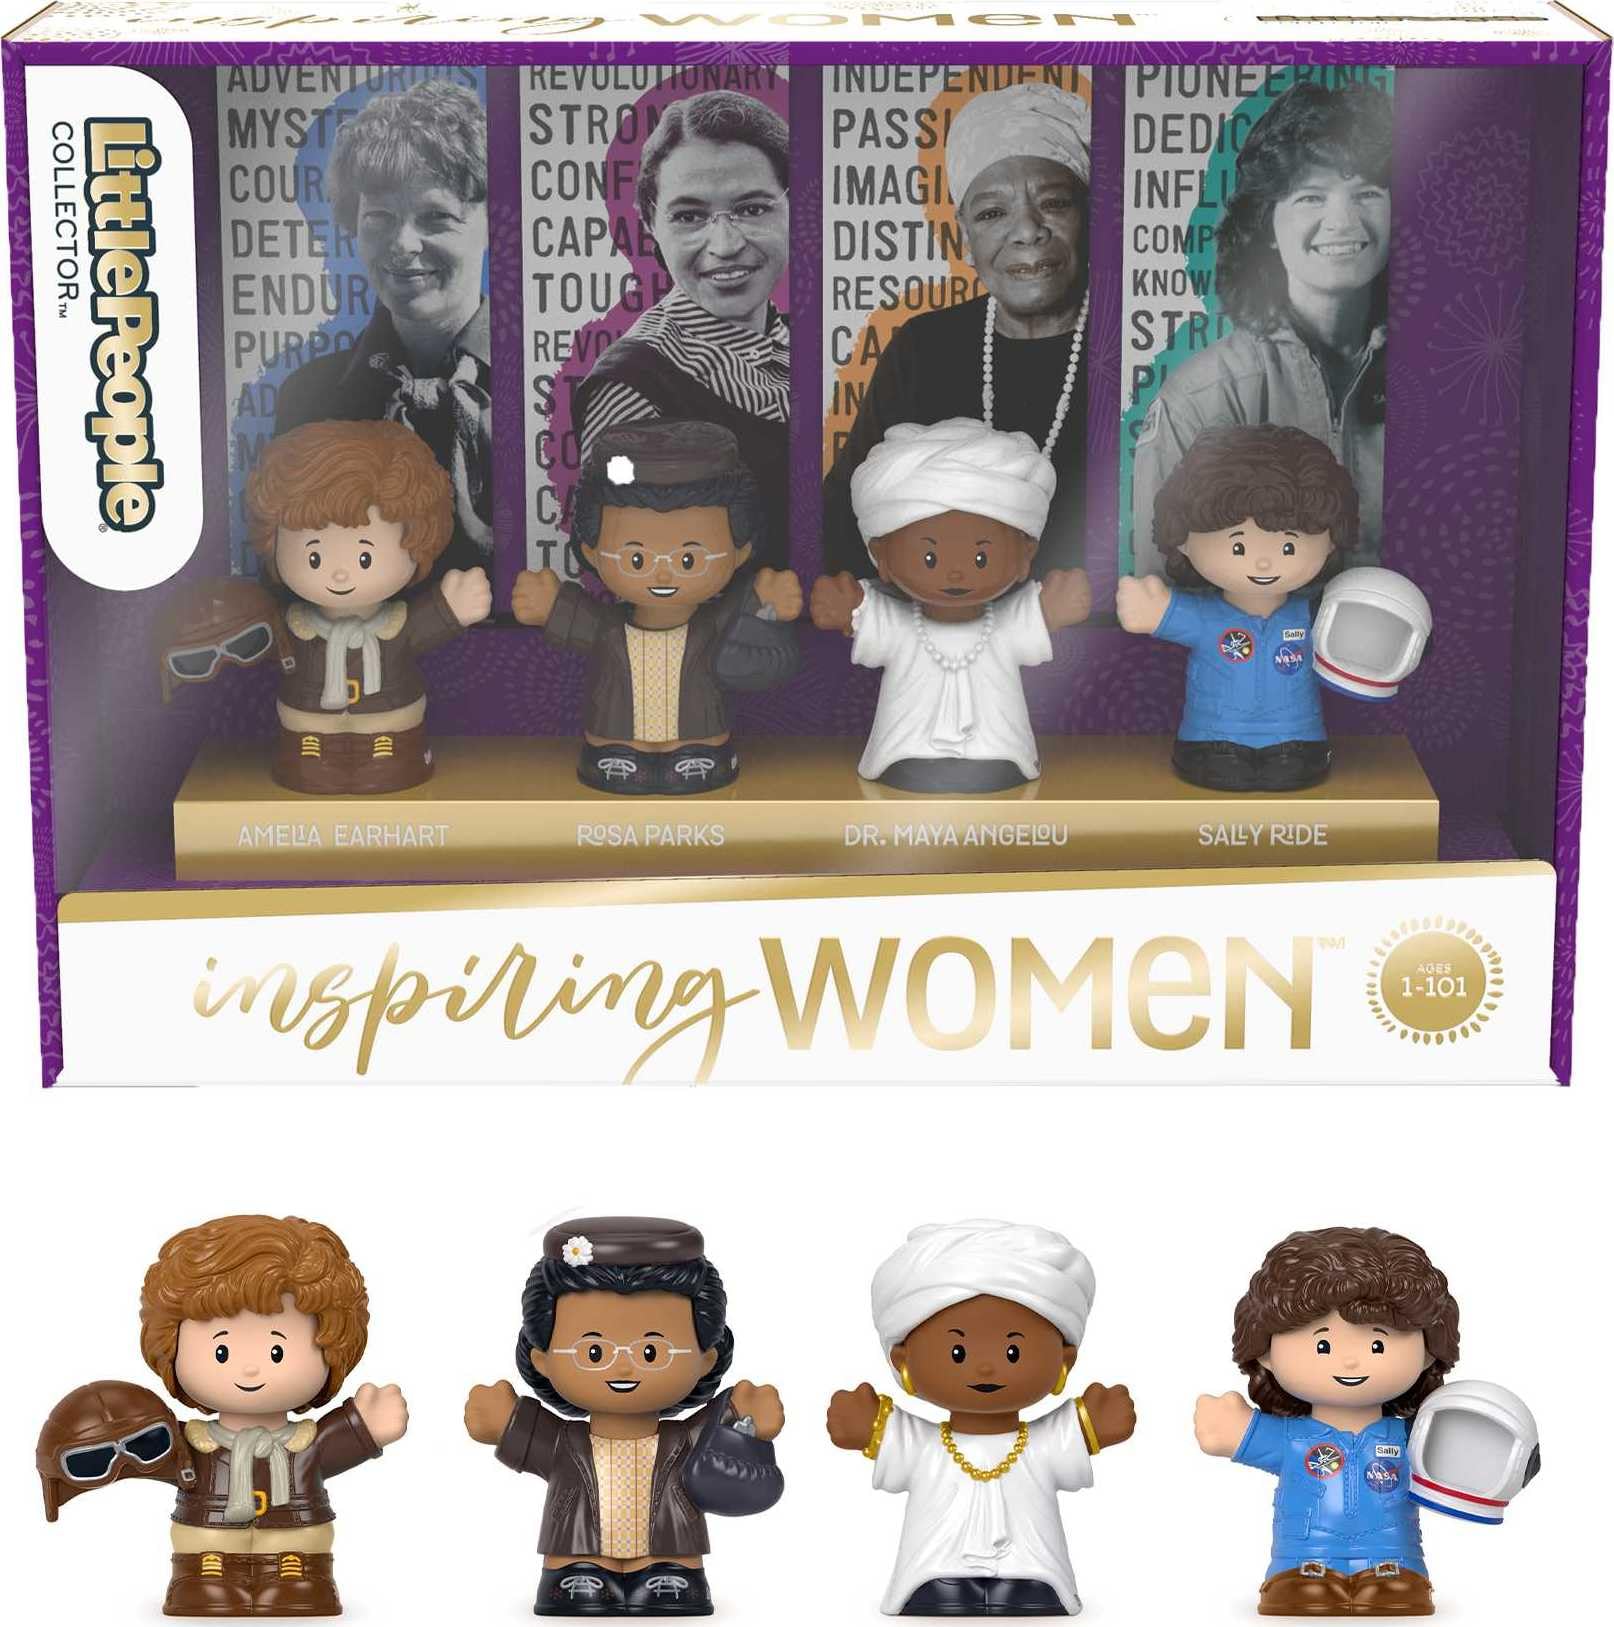 4-Piece 2.5" Little People Inspiring Women Special Edition Collector Set $4.25 + Free Shipping w/ Prime or on $35+